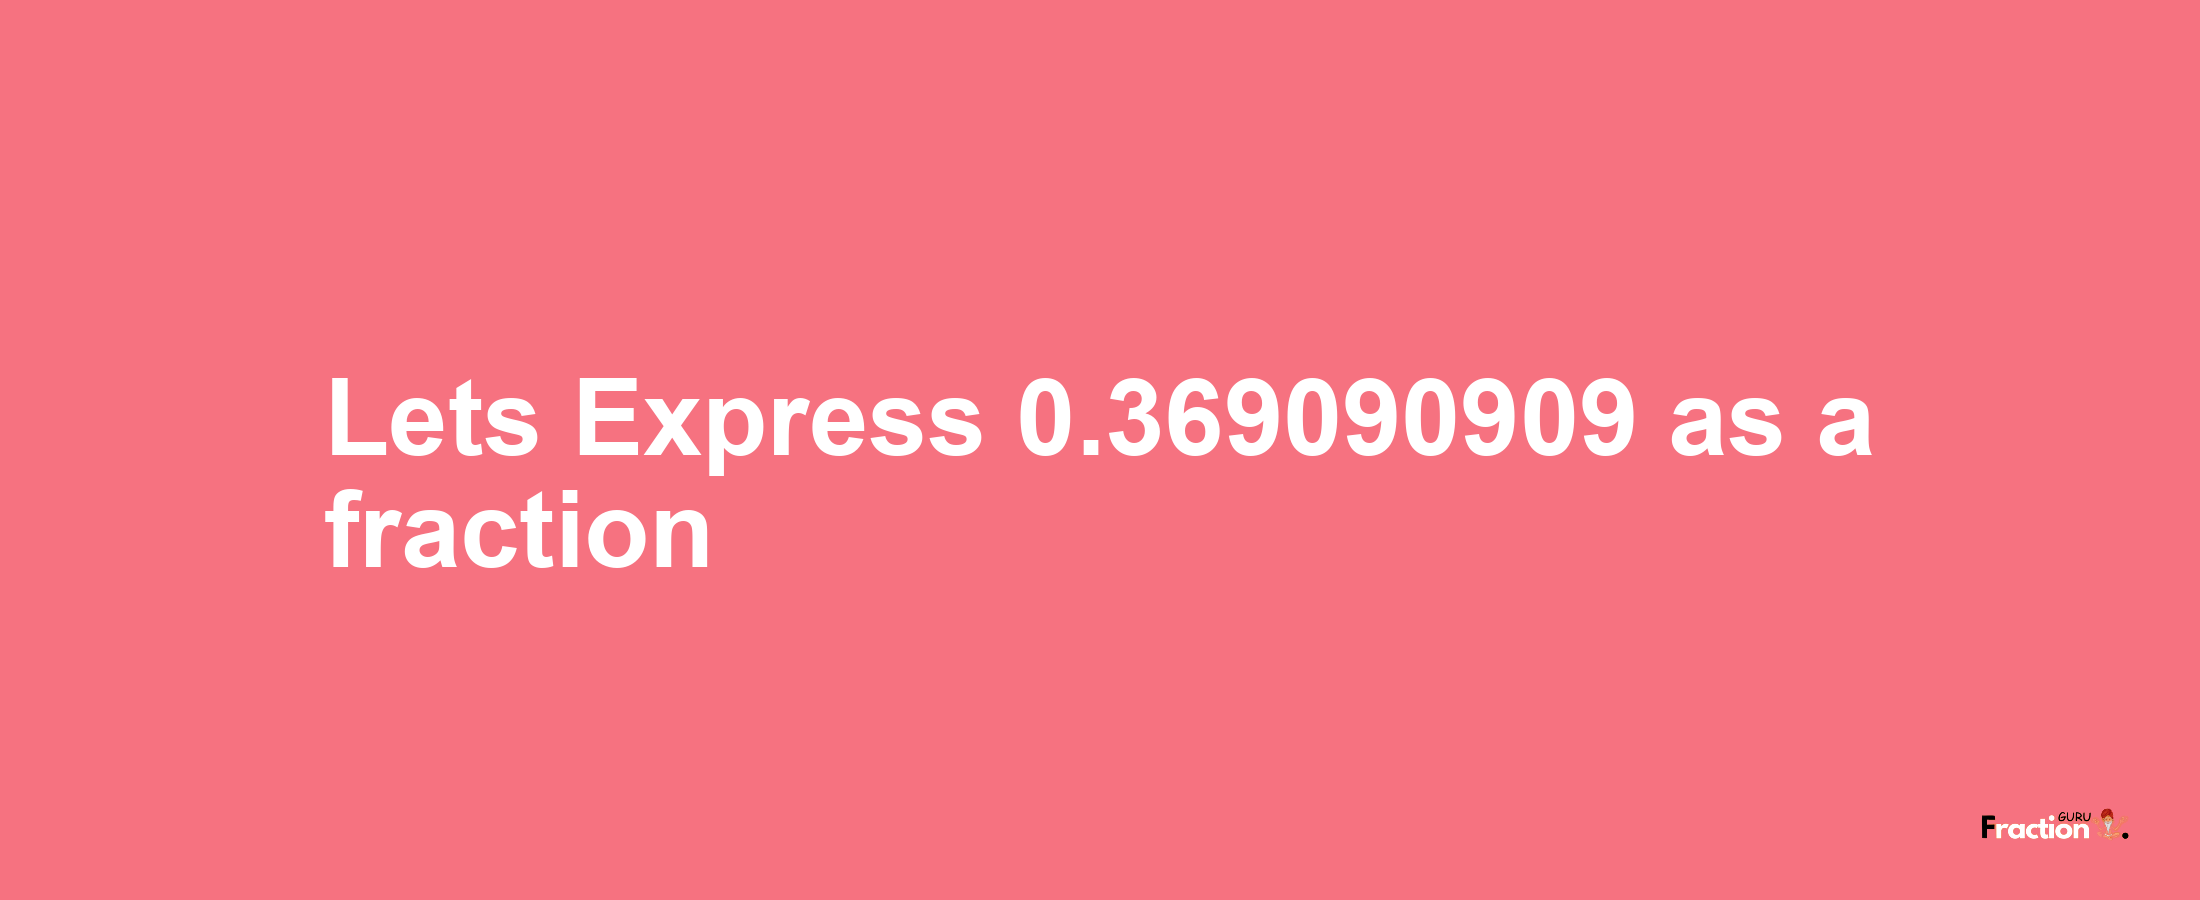 Lets Express 0.369090909 as afraction